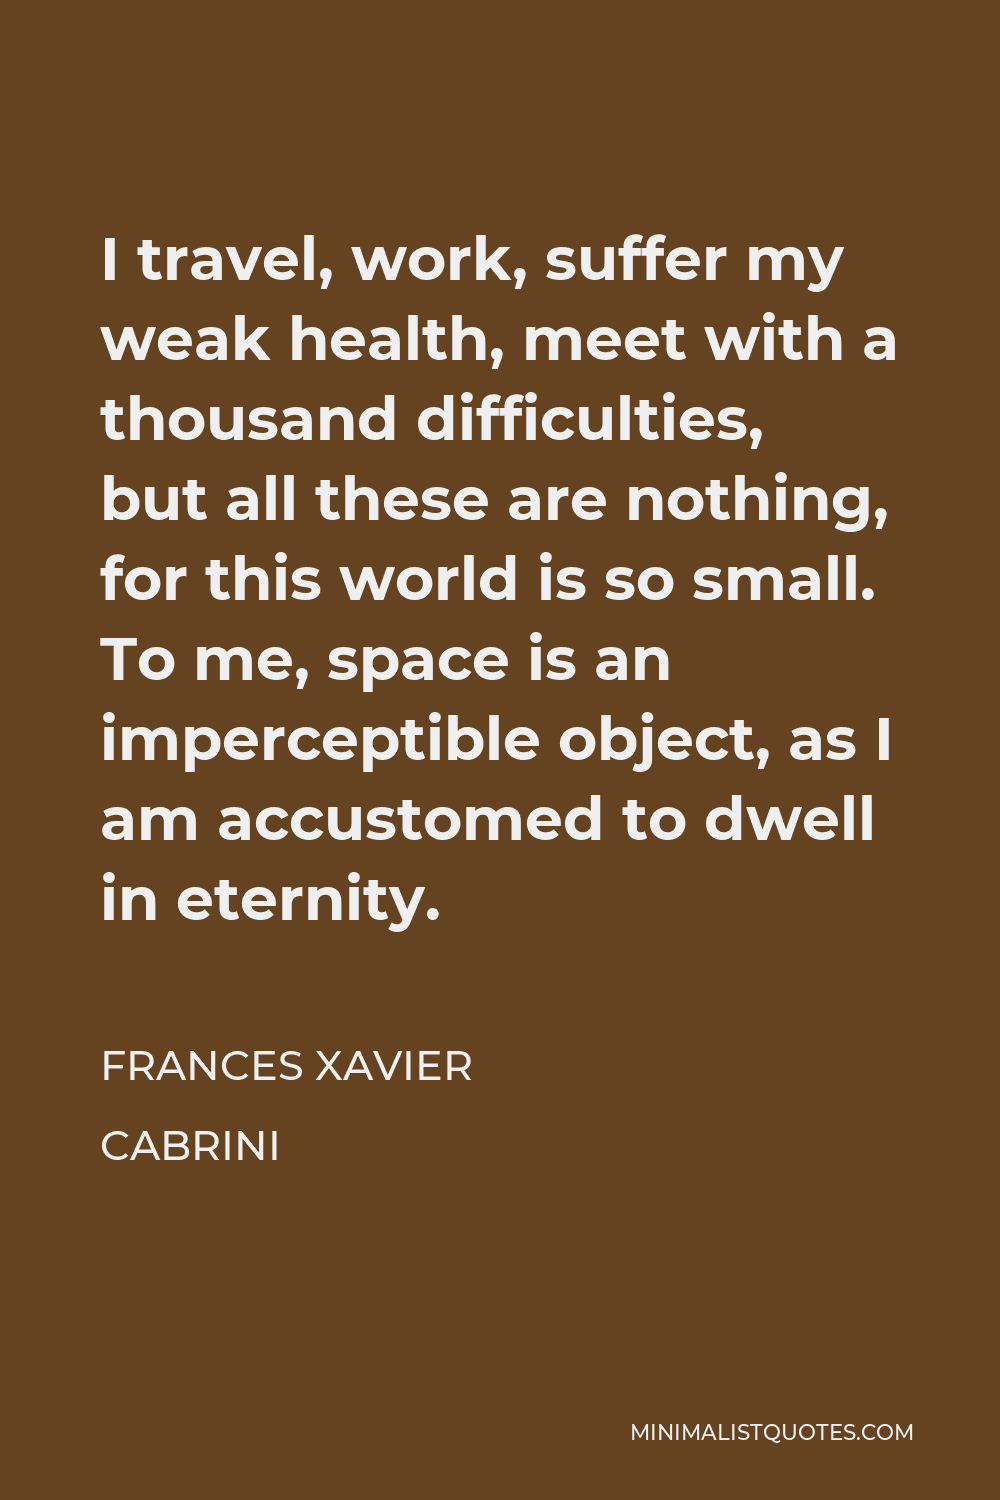 Frances Xavier Cabrini Quote - I travel, work, suffer my weak health, meet with a thousand difficulties, but all these are nothing, for this world is so small. To me, space is an imperceptible object, as I am accustomed to dwell in eternity.